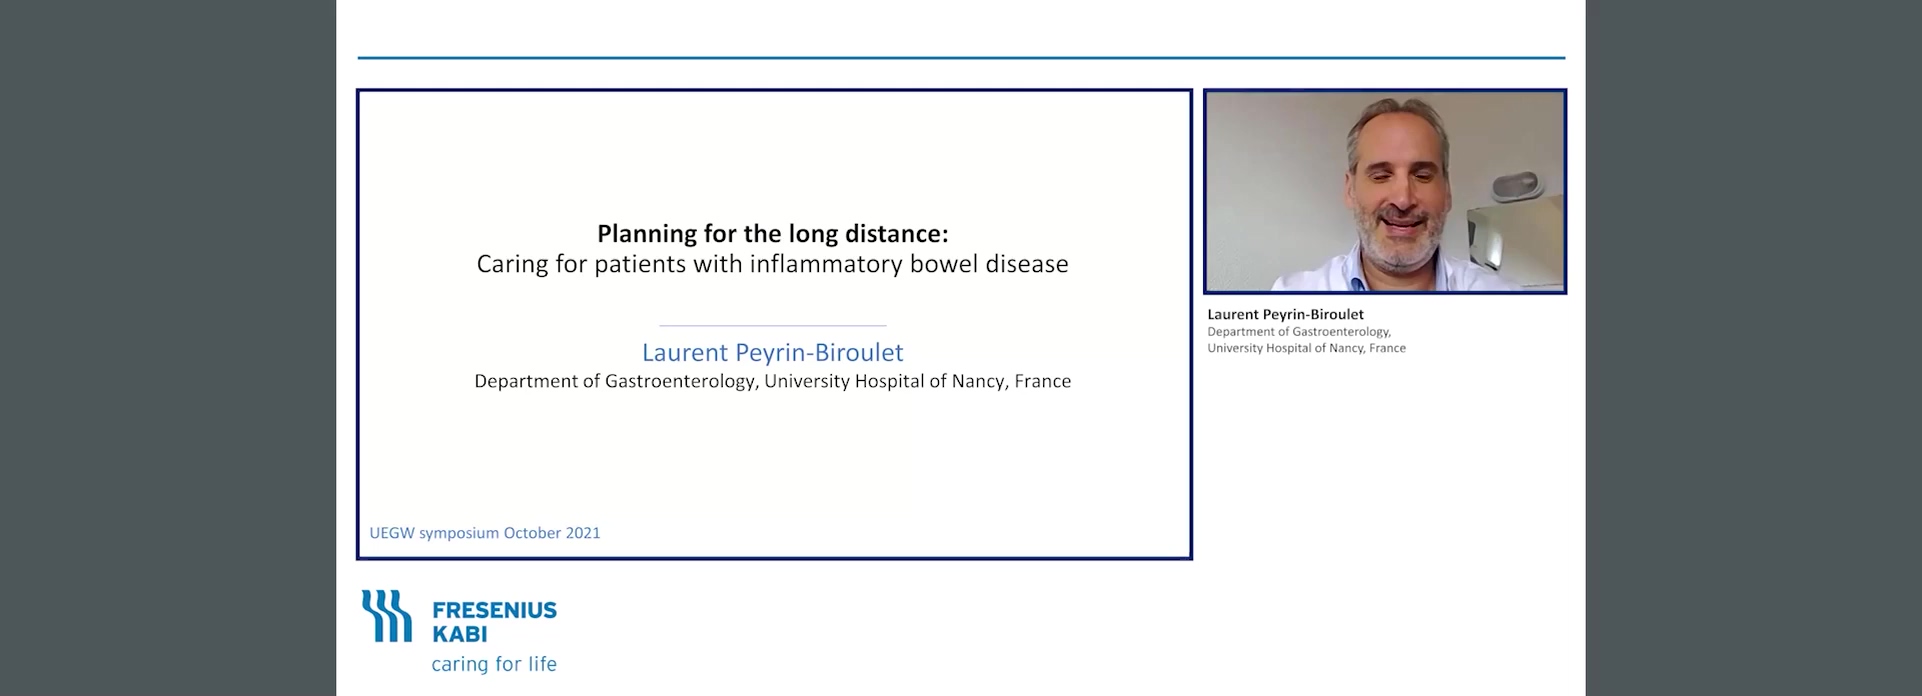 Planning for the long distance: Caring for patients with inflammatory bowel disease (Fresenius Kabi)